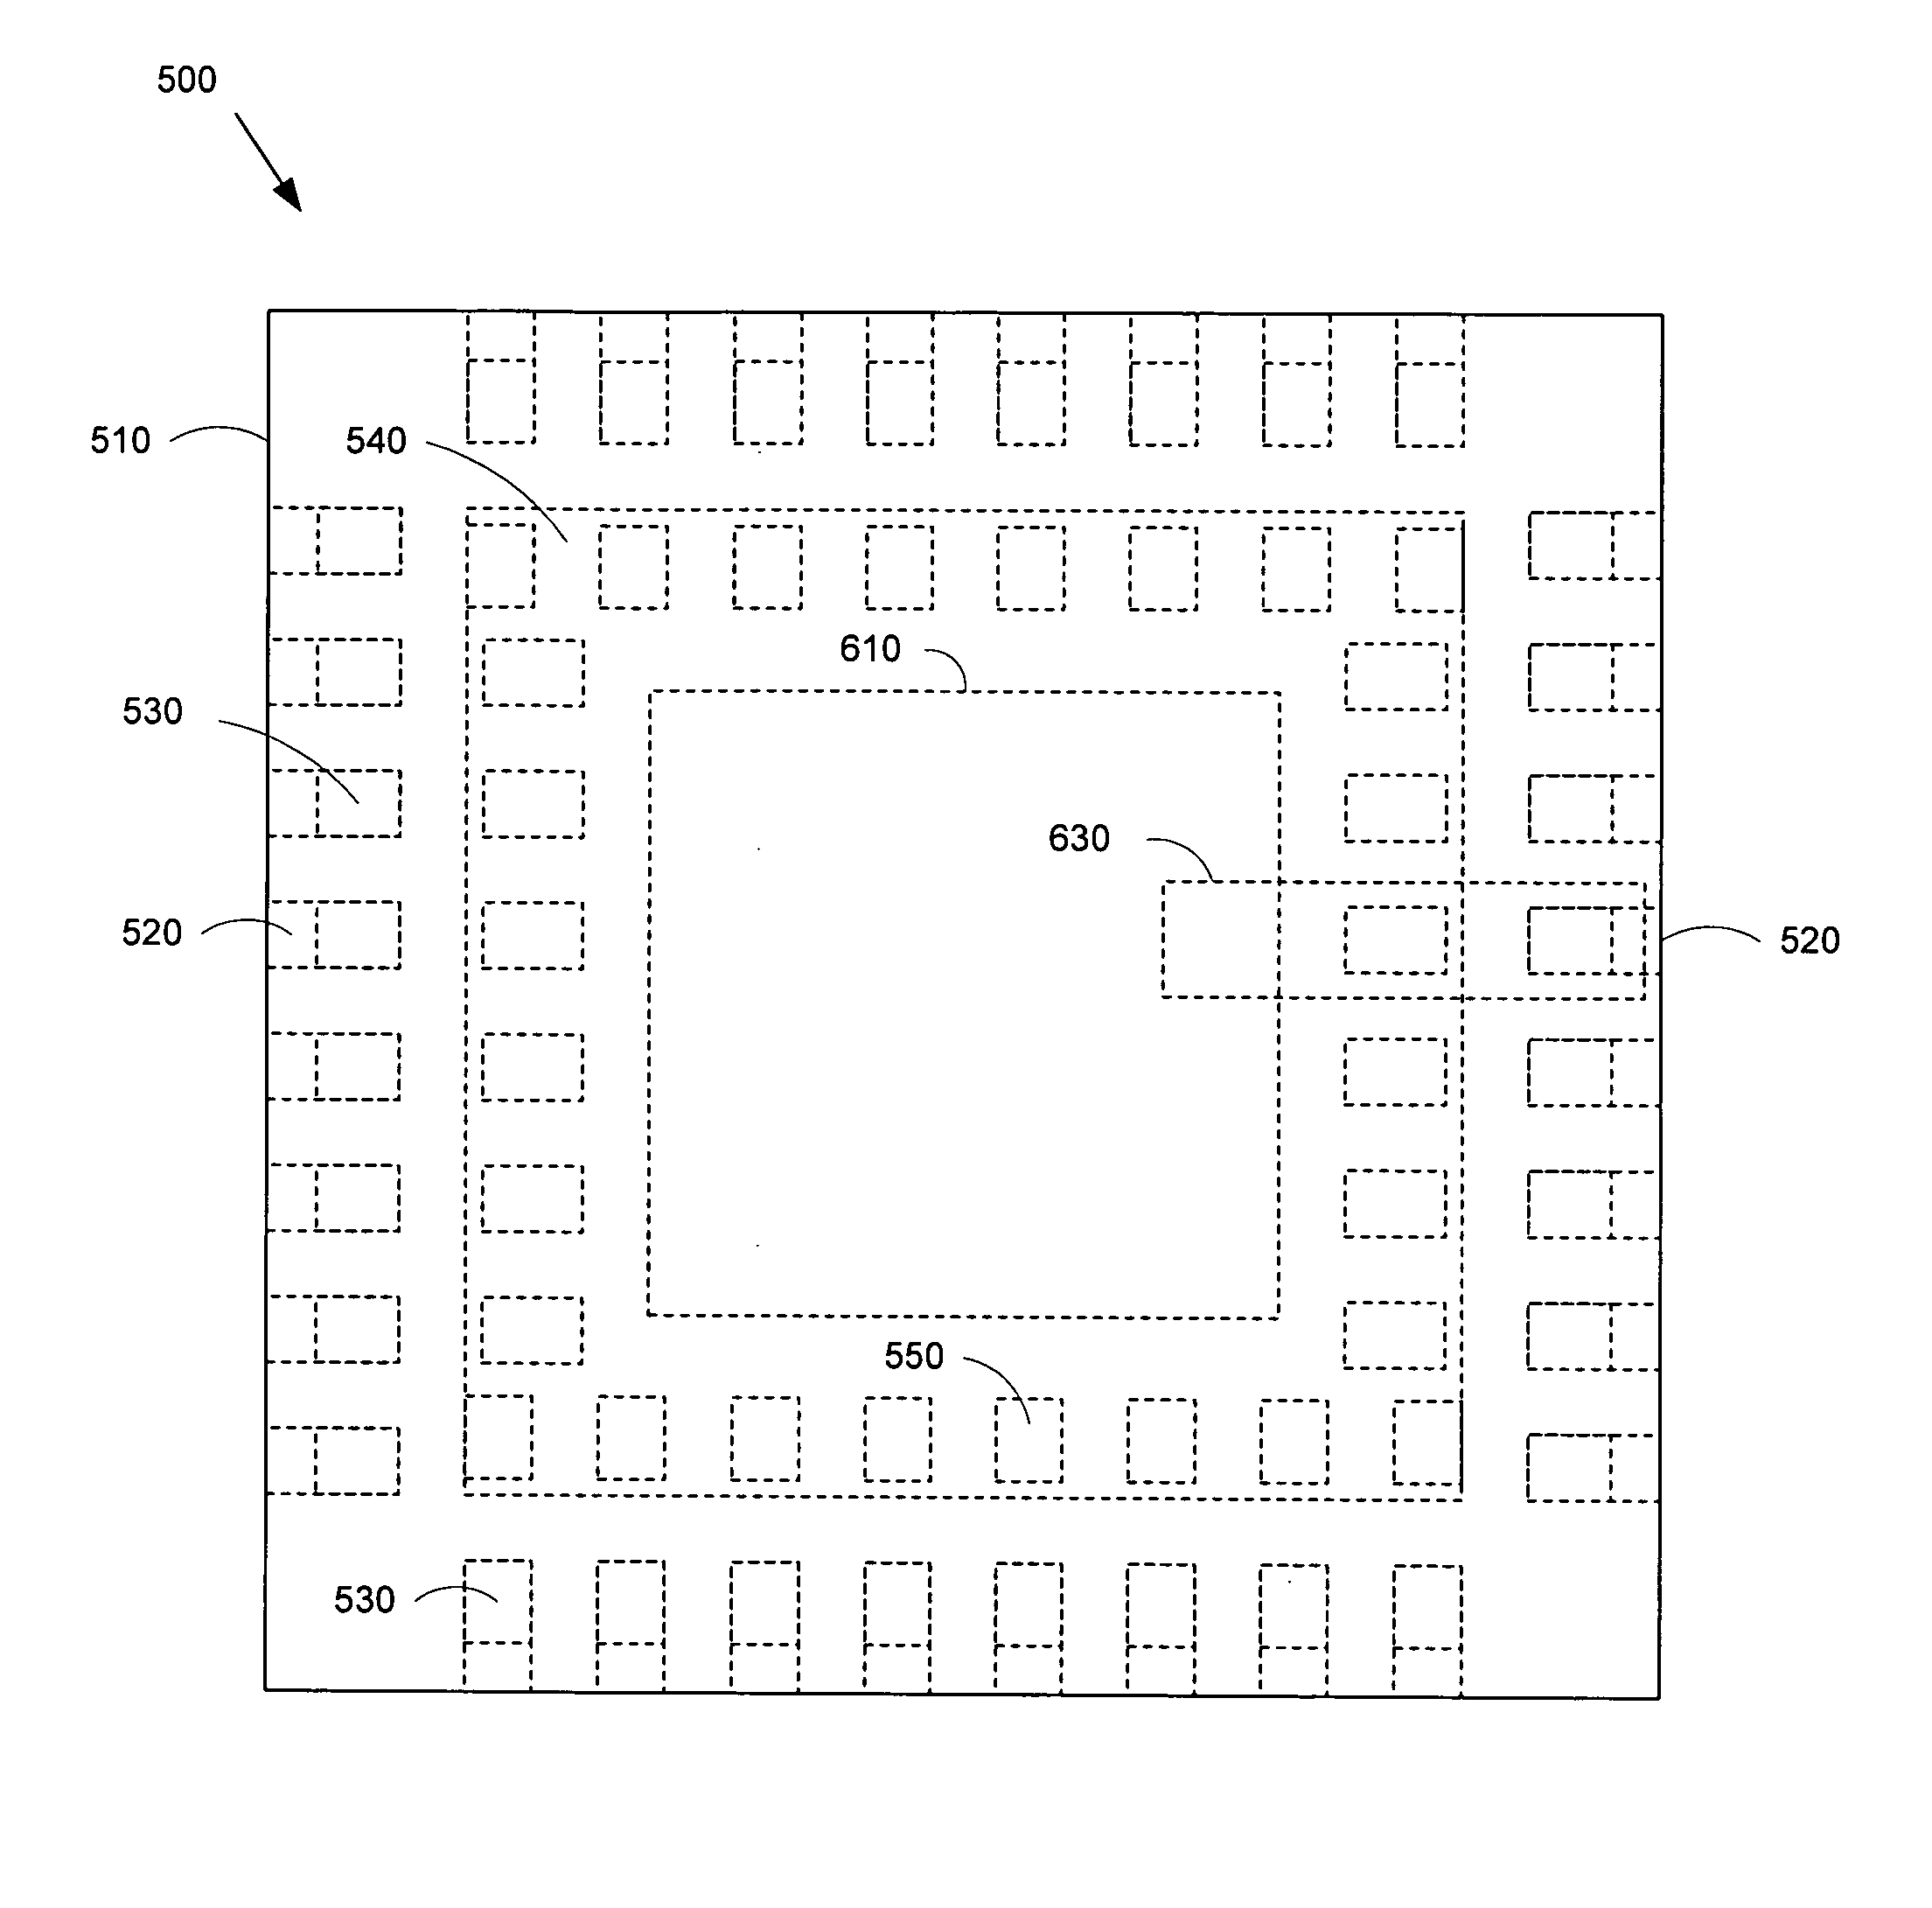 System and method for improving solder joint reliability in an integrated circuit package